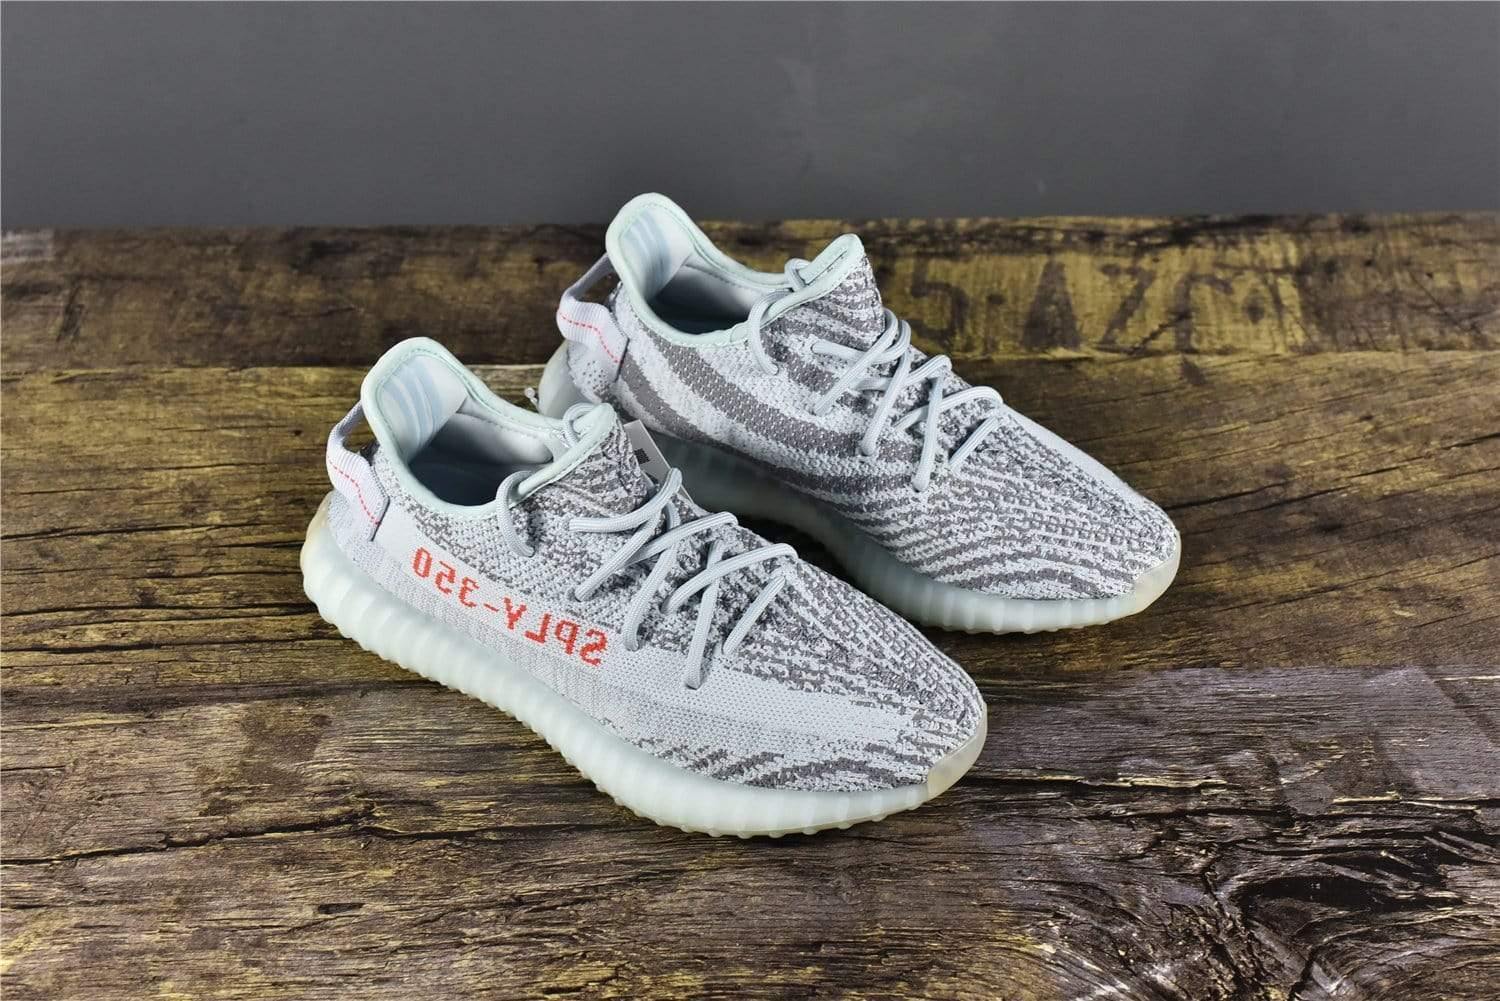 US$ 120.00 - adidas Yeezy Boost 350 V2 Blue Tint - Chan Sneakers Review